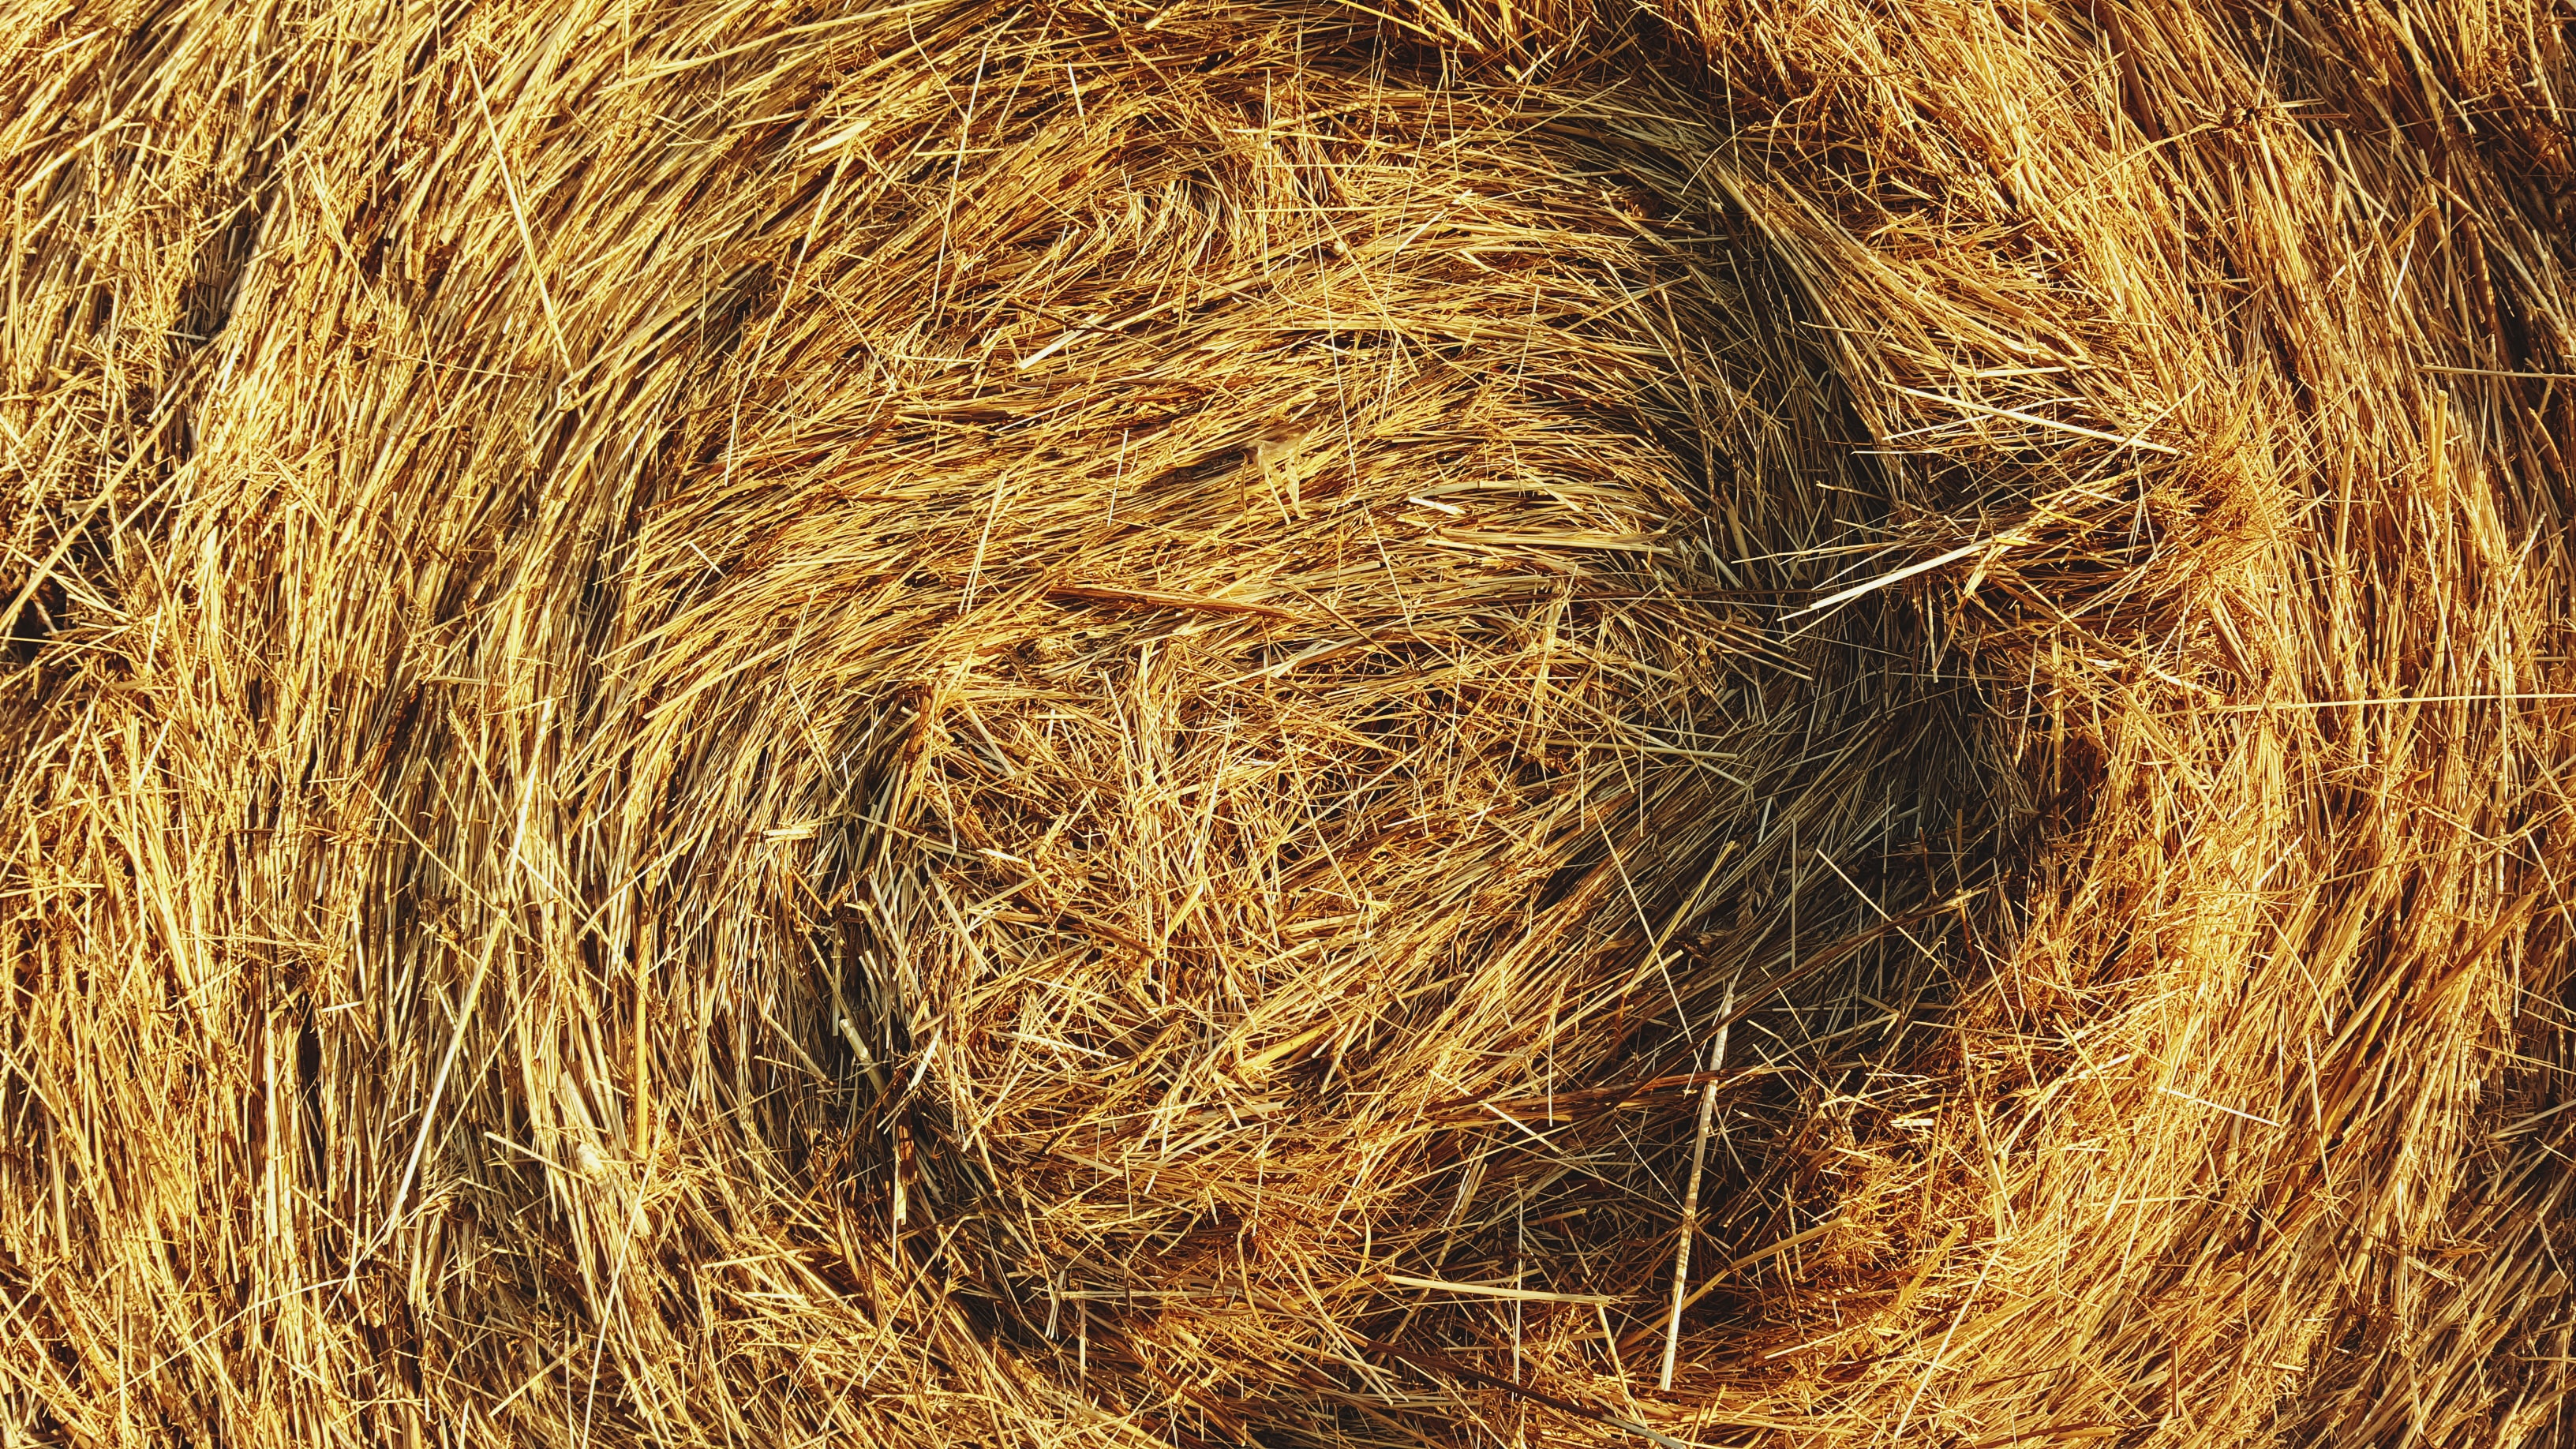 While doing code reviews, we are not looking for the needle in the haystack